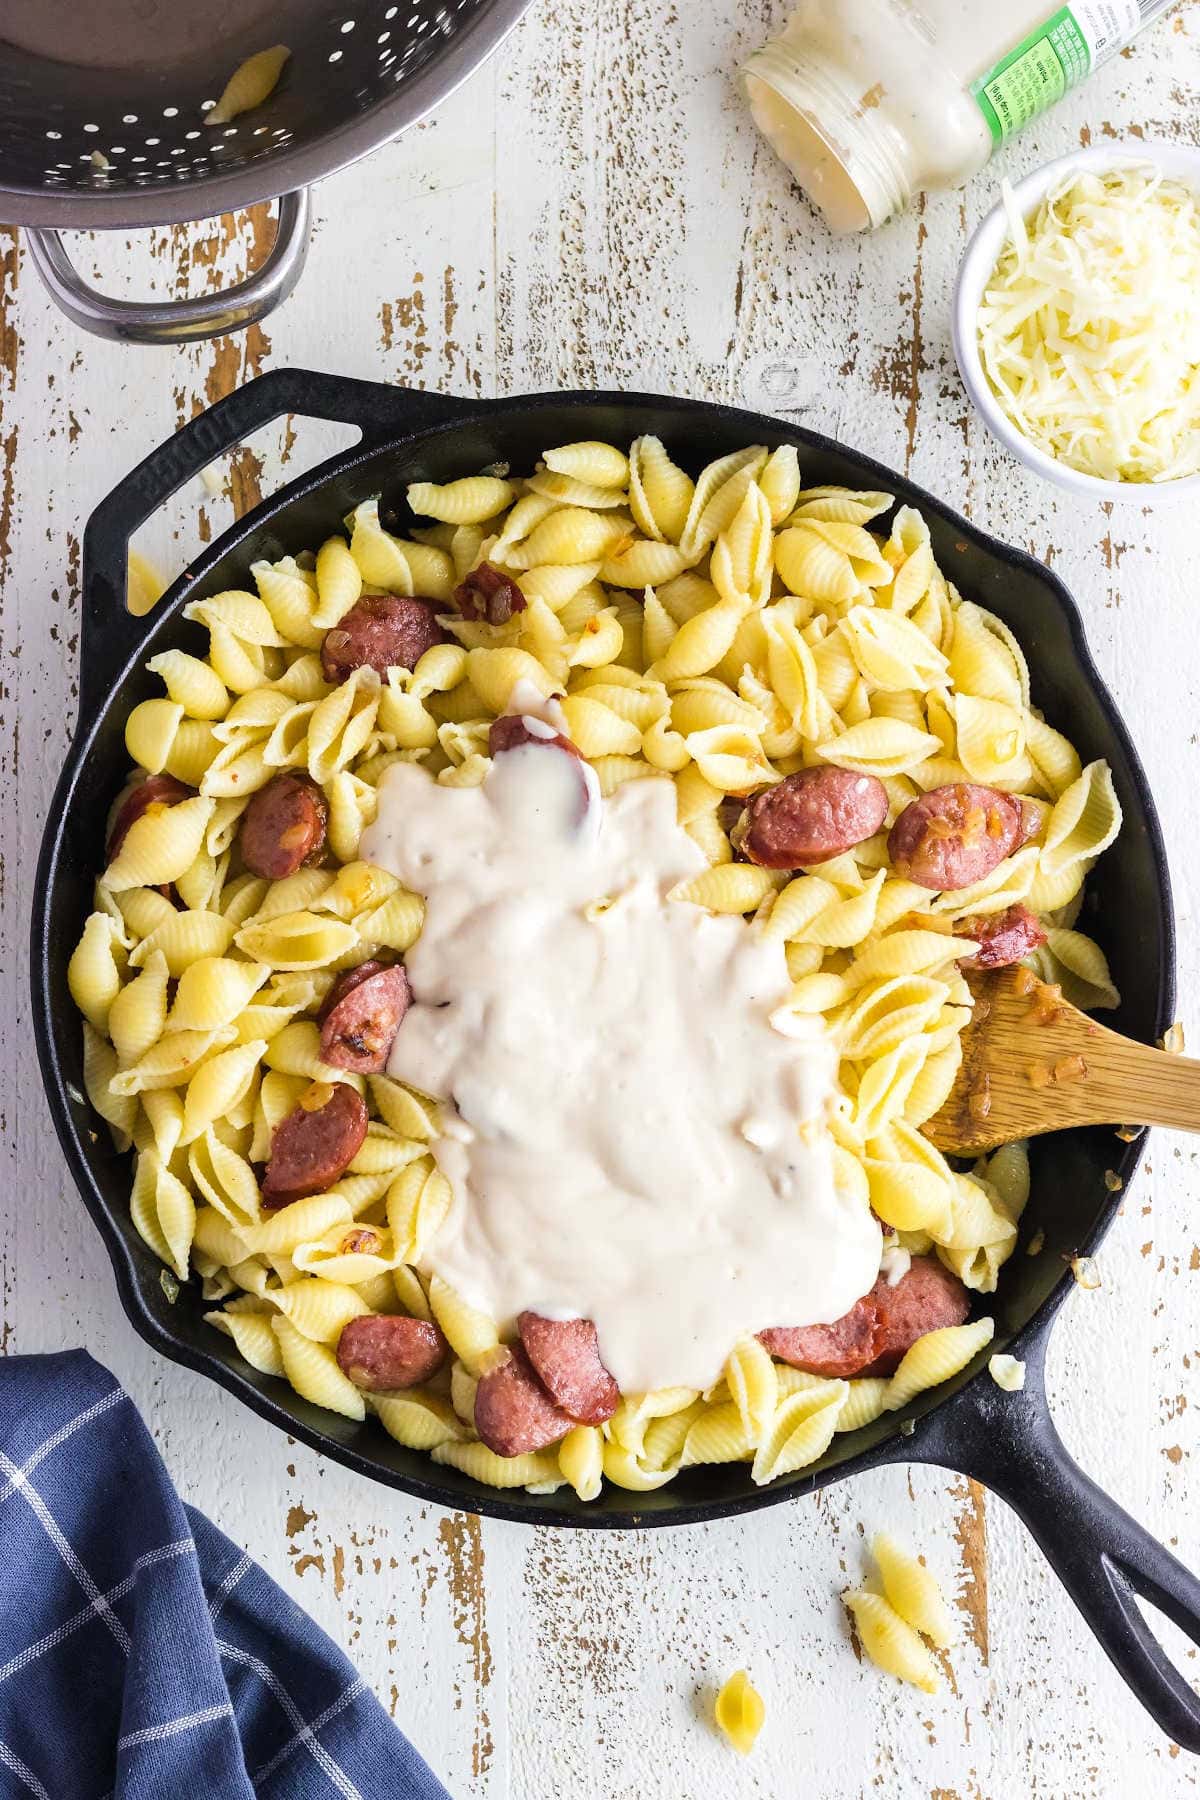 pasta and Alfredo sauce added to the smoked sausage.